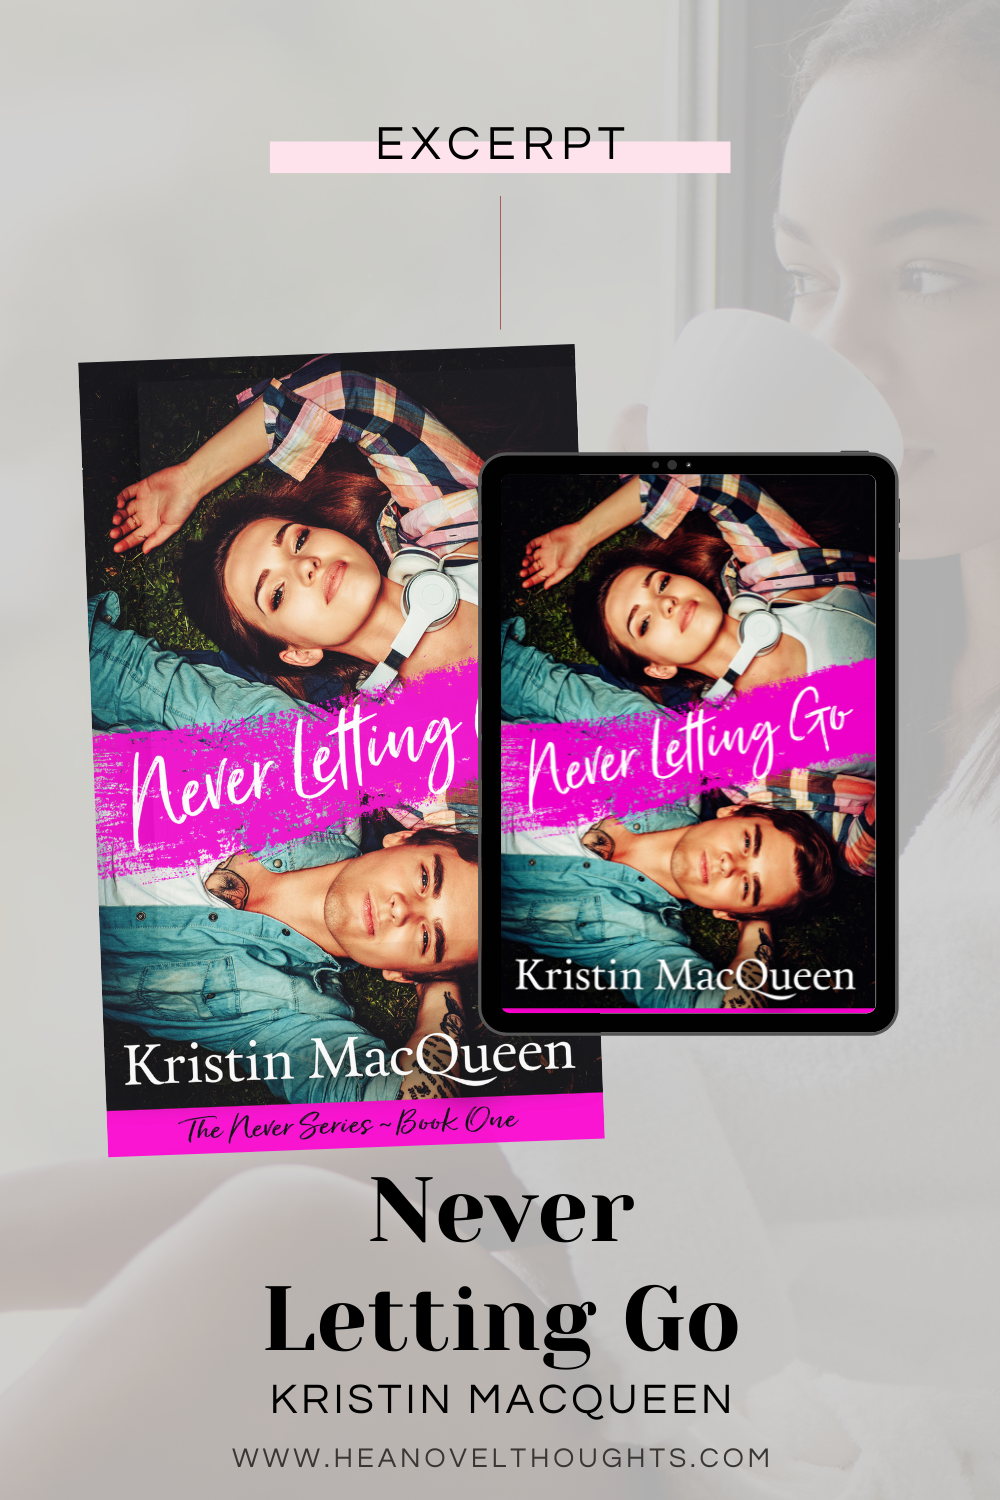 Exclusive Excerpt of Never Letting Go by Kristin MacQueen